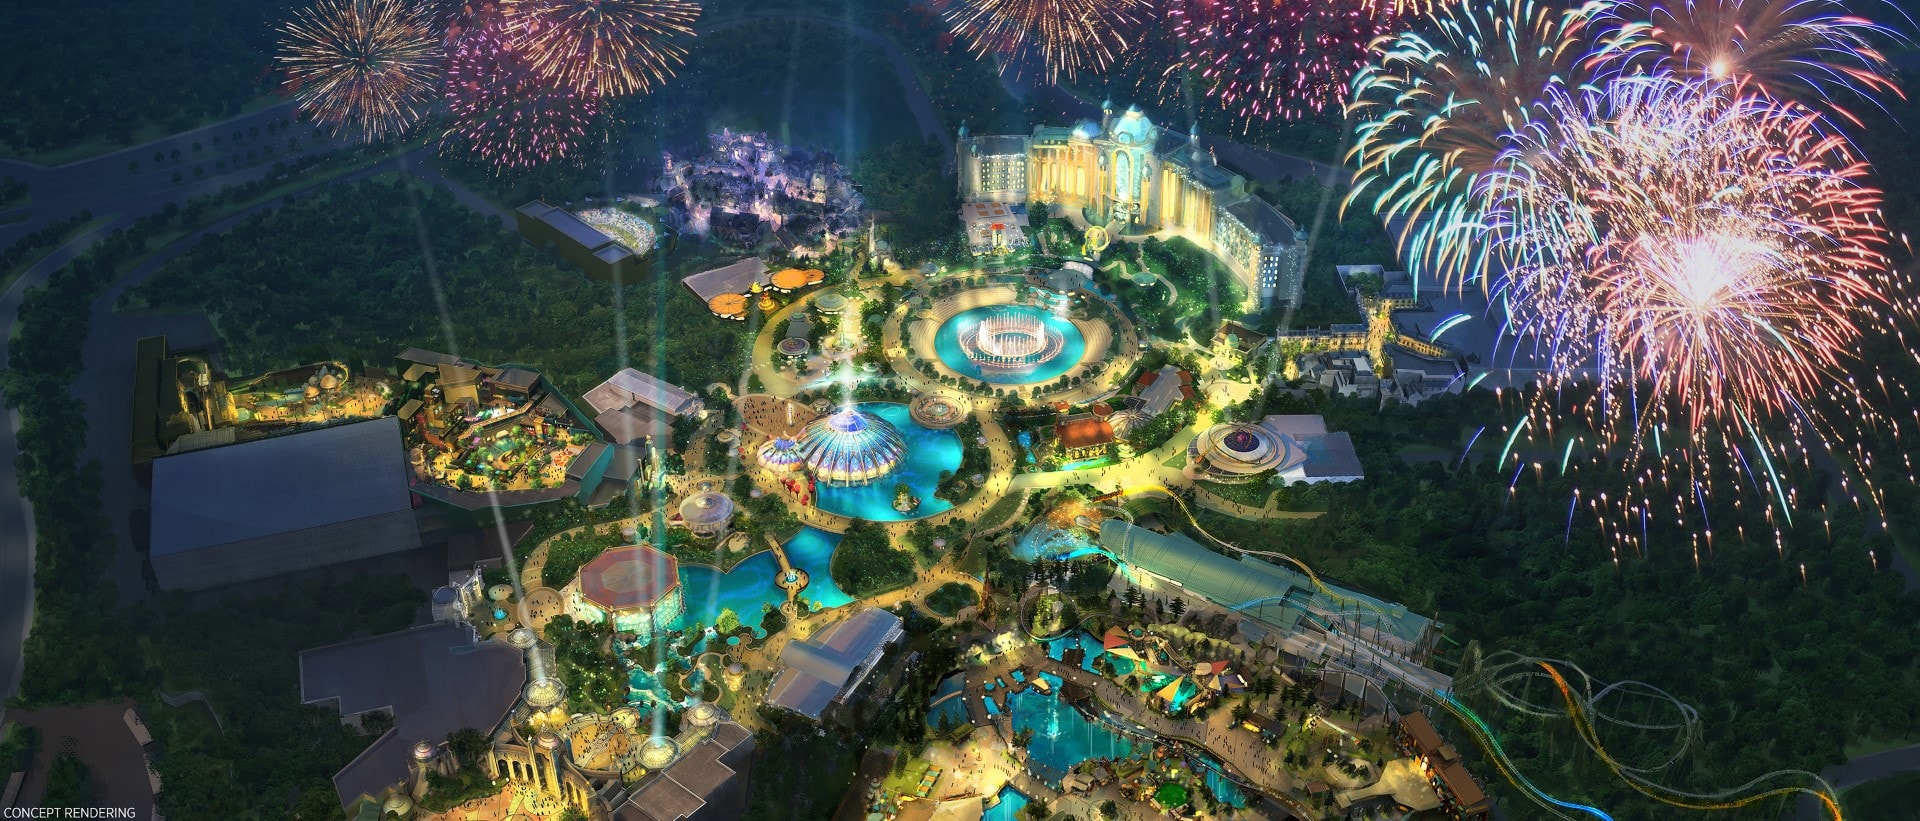 aerial view of theme park with pool and fireworks exploding over the Universal’s Epic Universe park